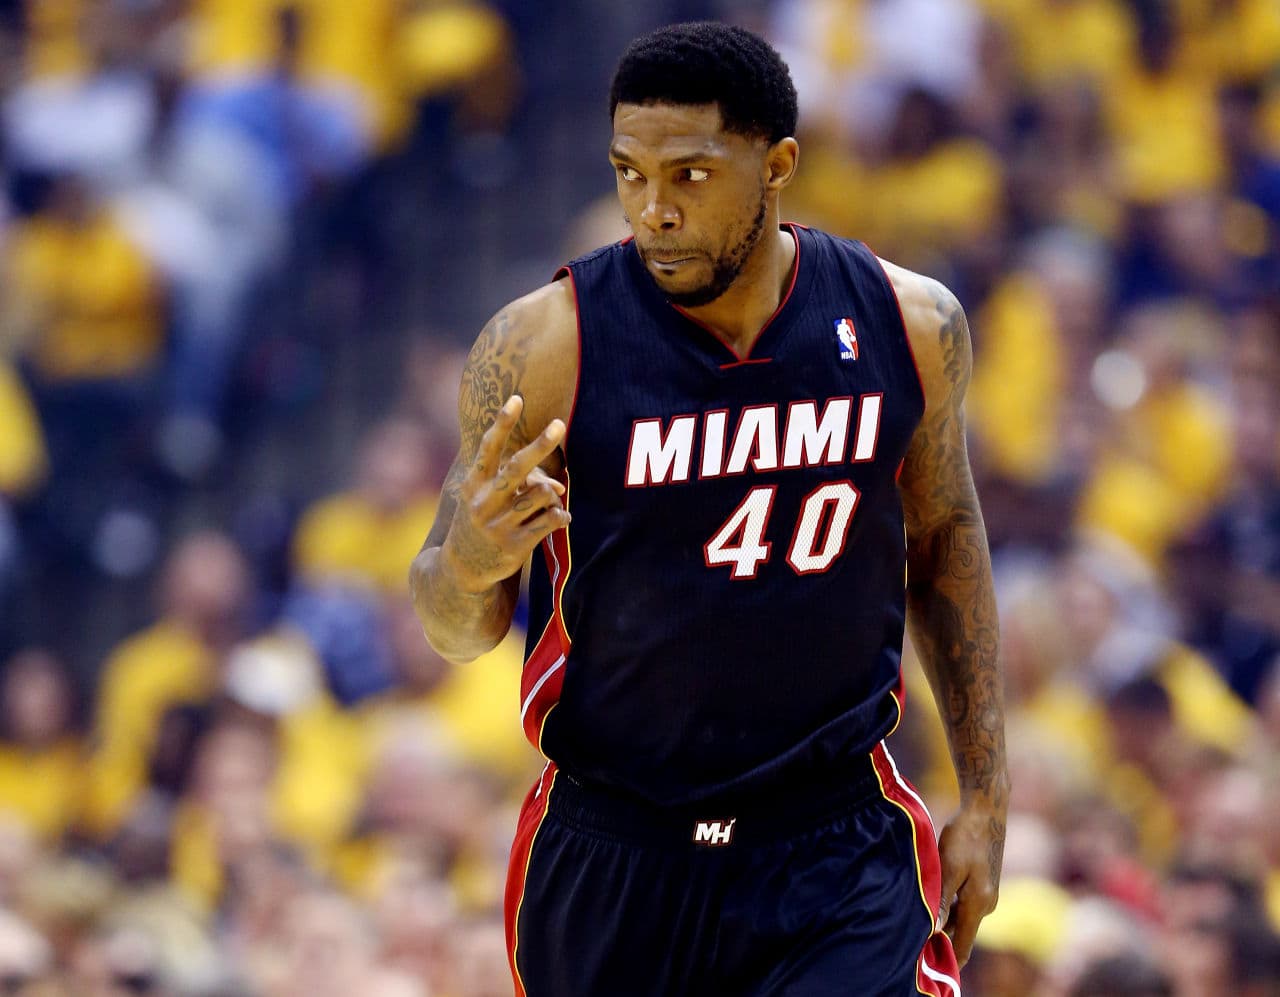 One reason Udonis Haslem didn't get drafted out of college was his weight. He tipped the scale at over 300 pounds. (Andy Lyons/Getty Images)